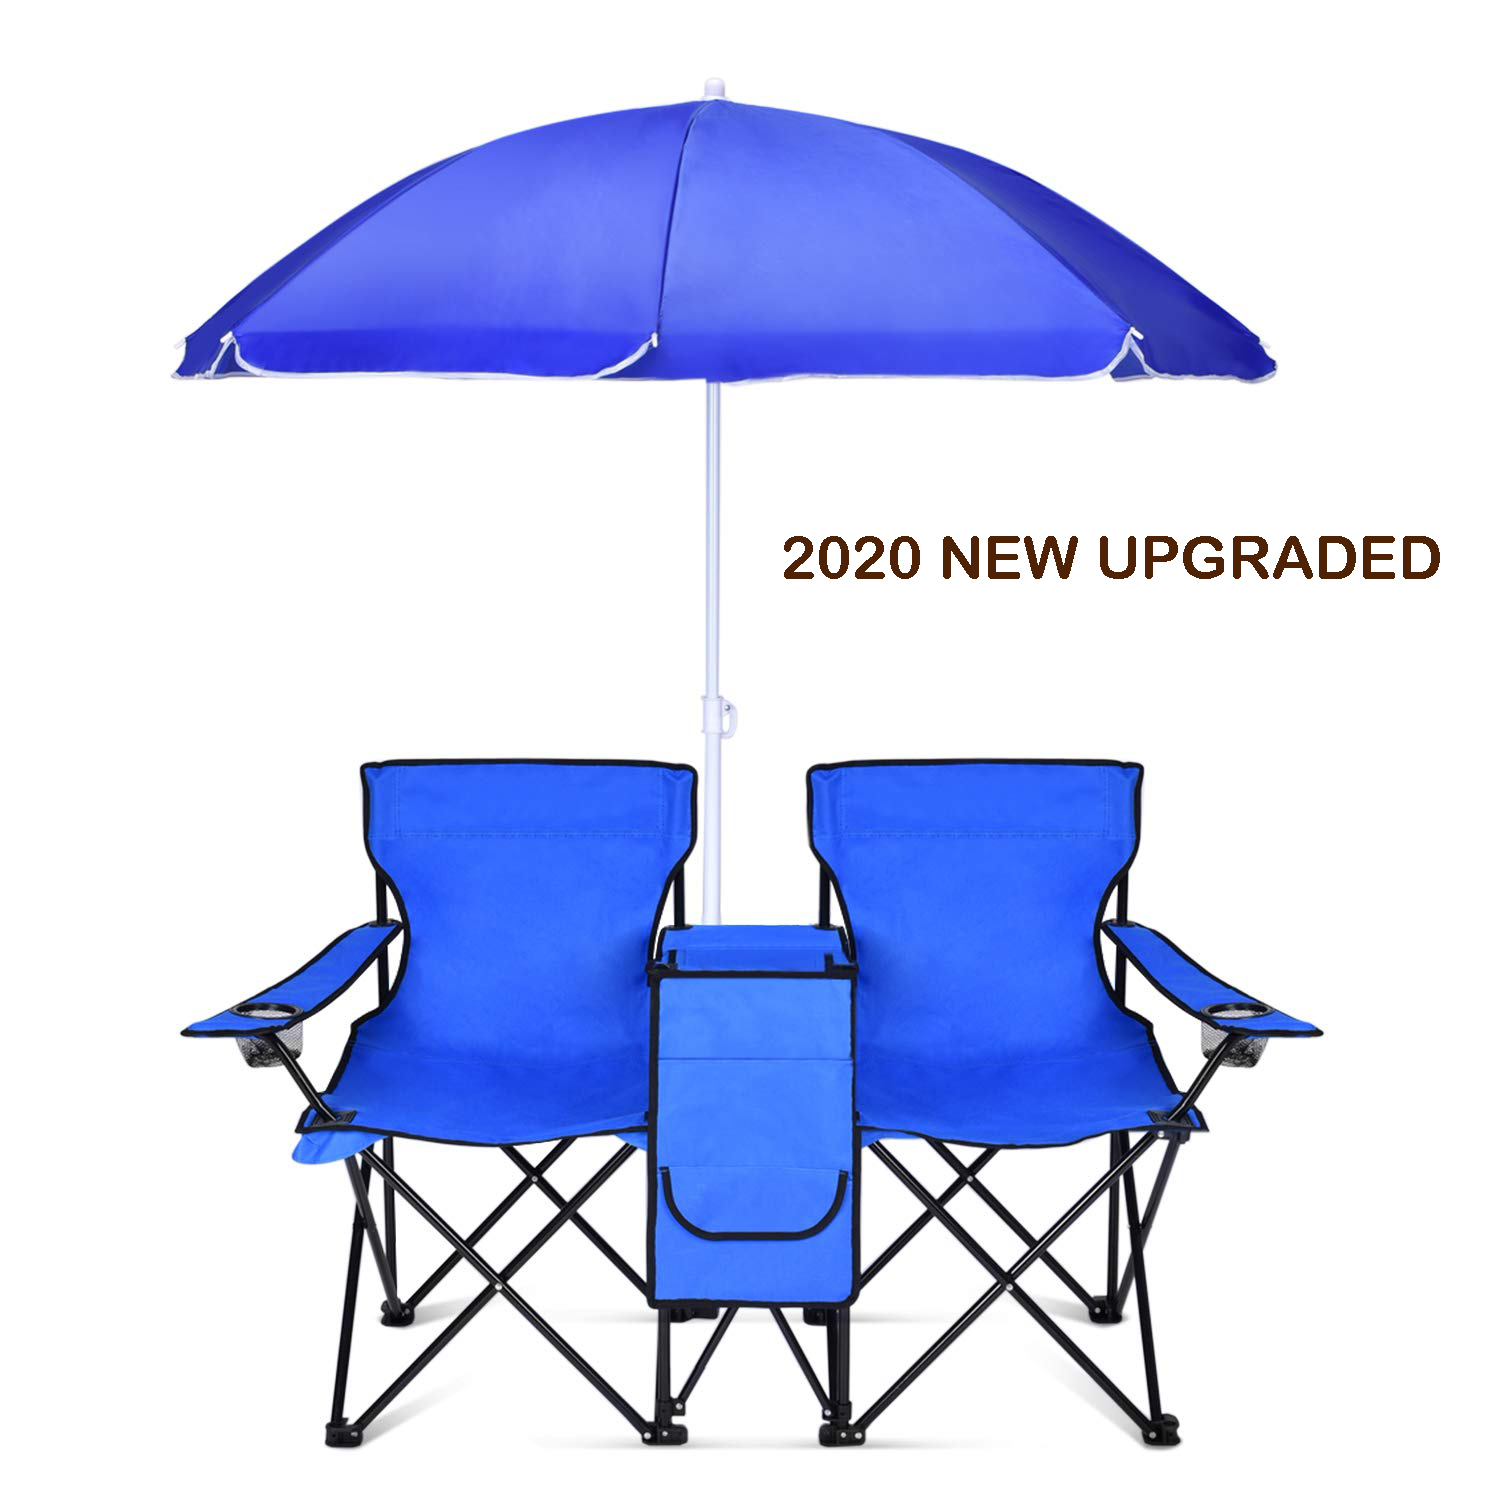 Urhomepro Folding New Camping Chairs with Umbrella Beverage Holder Blue, L3824 Polyester, Steel - image 1 of 9